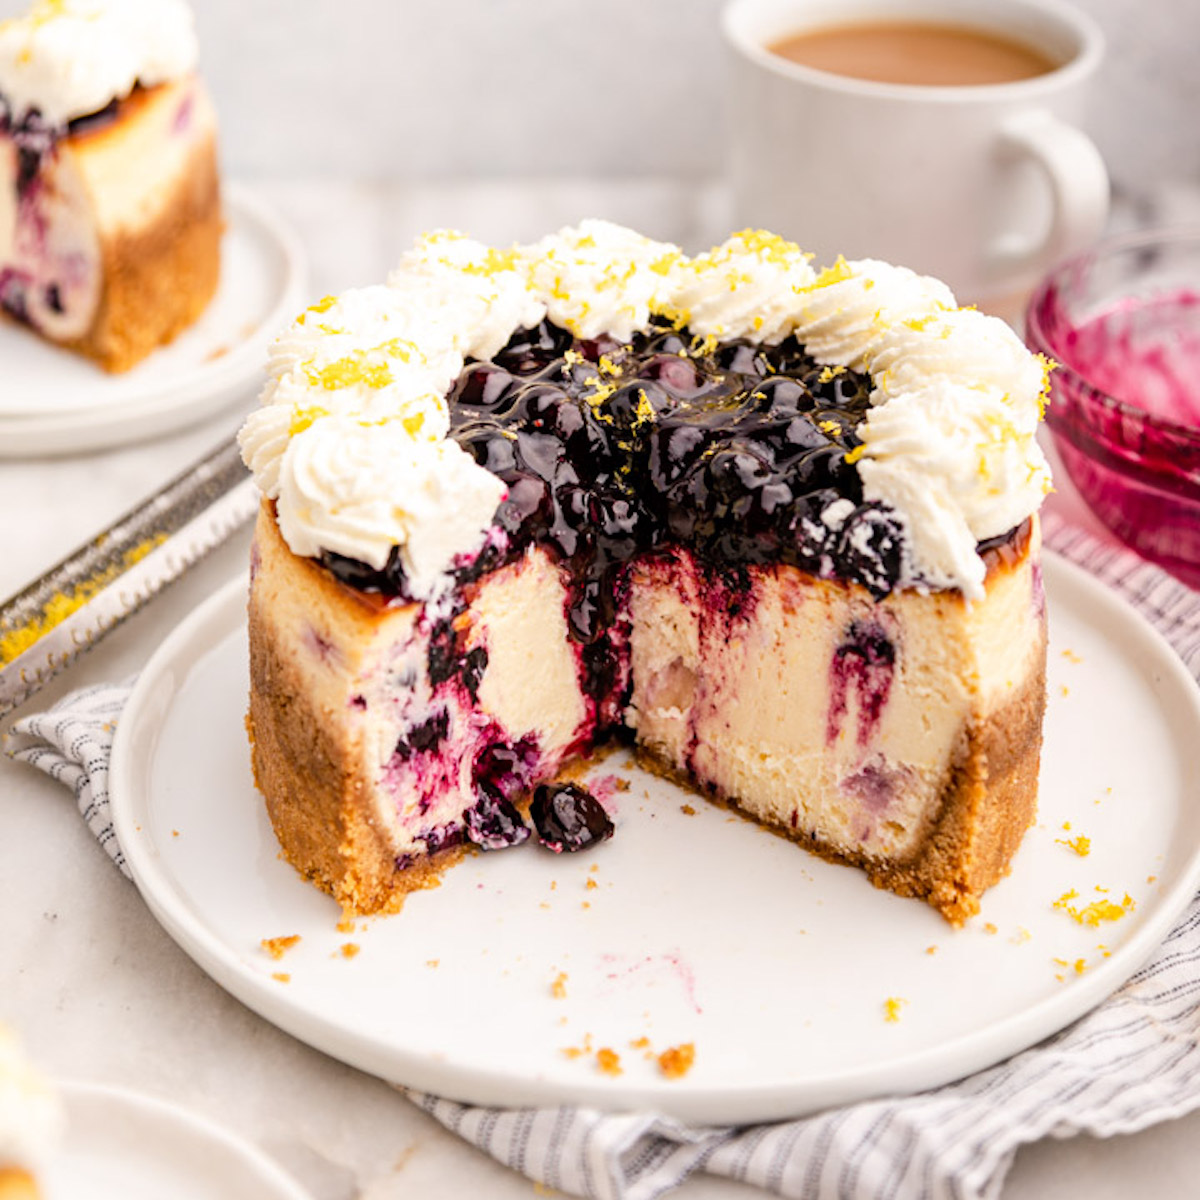 Lemon Blueberry Cheesecake {Step-by-Step Photos} Confessions of a Baking Queen